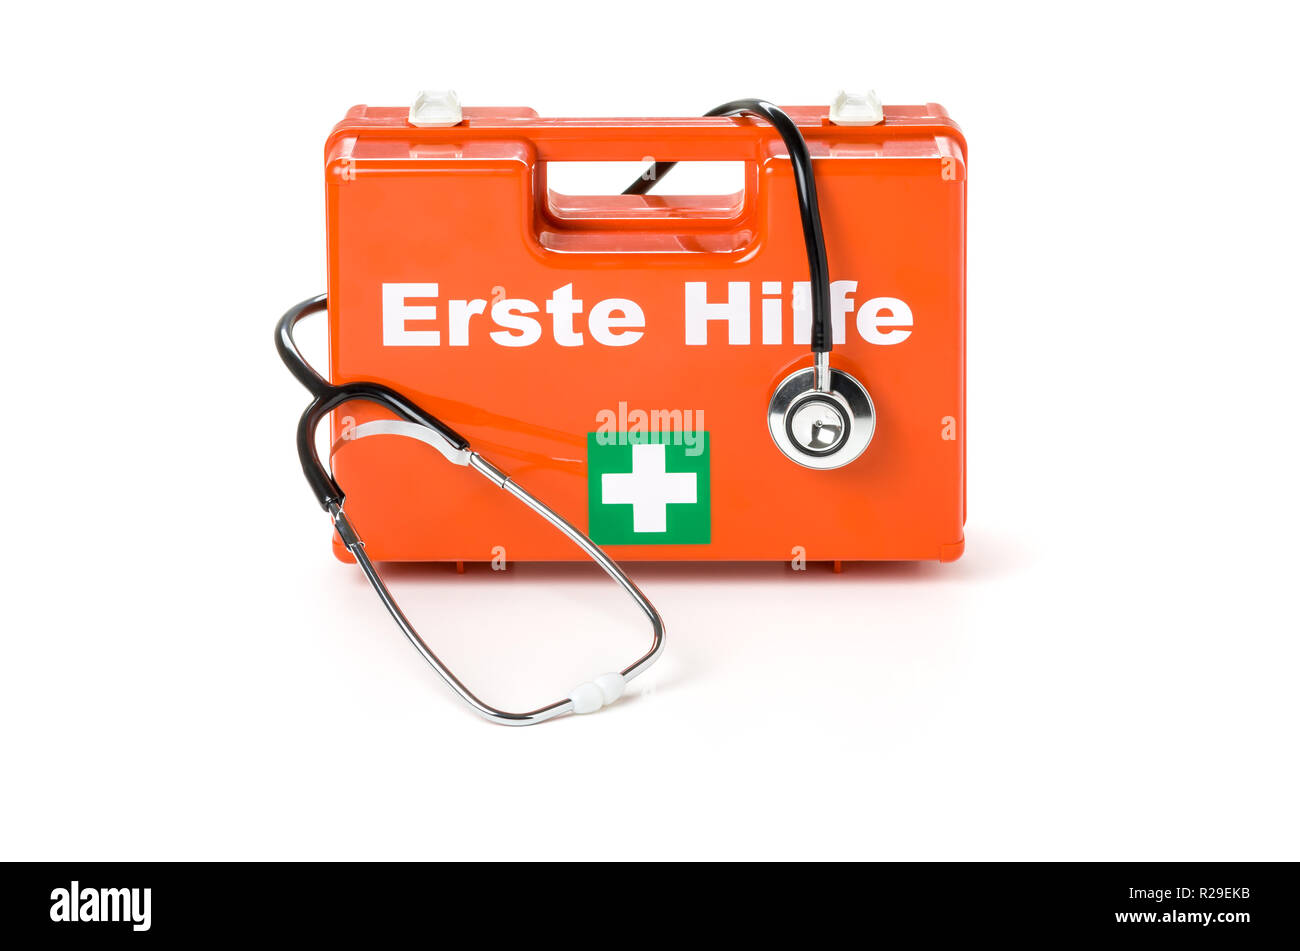 Erste Hilfe Kasten (German for First aid kit) with stethoscope Stock Photo